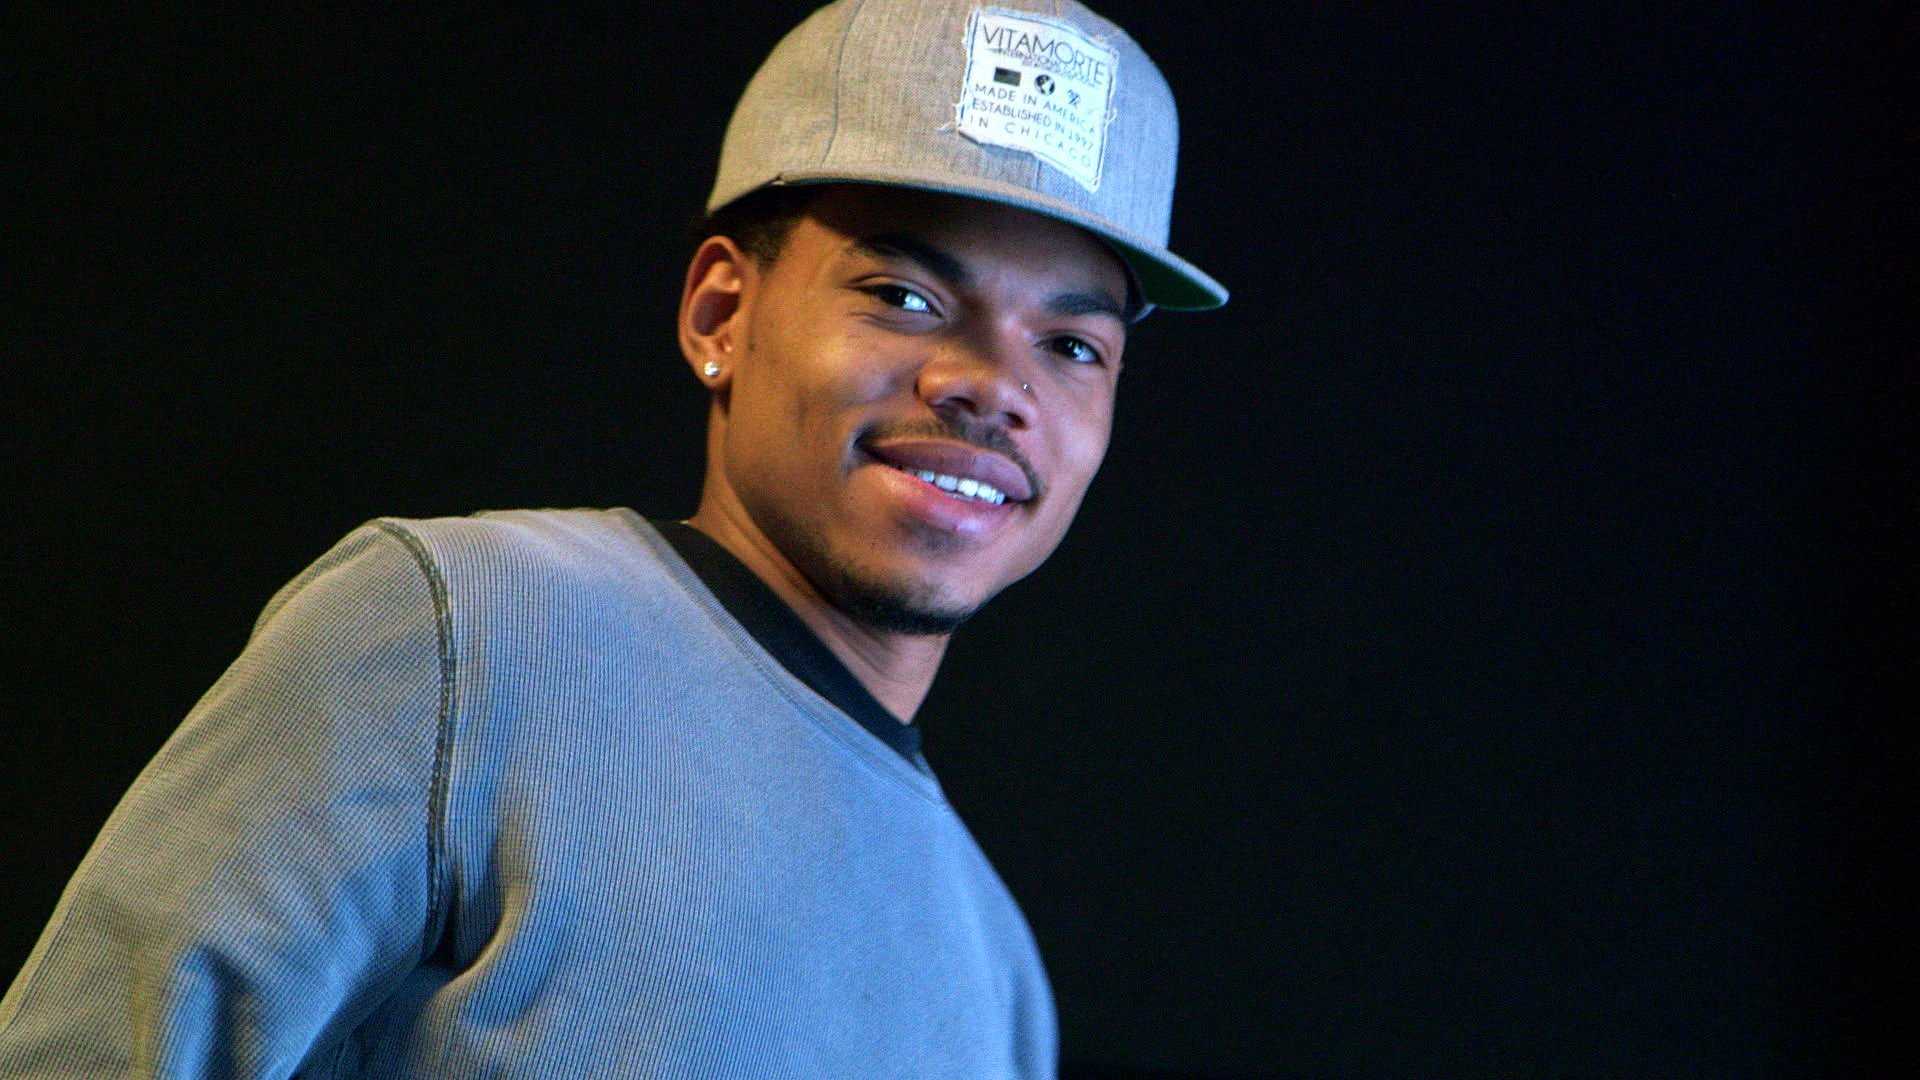 Chance the Rapper donates 30,000 backpacks to school kids